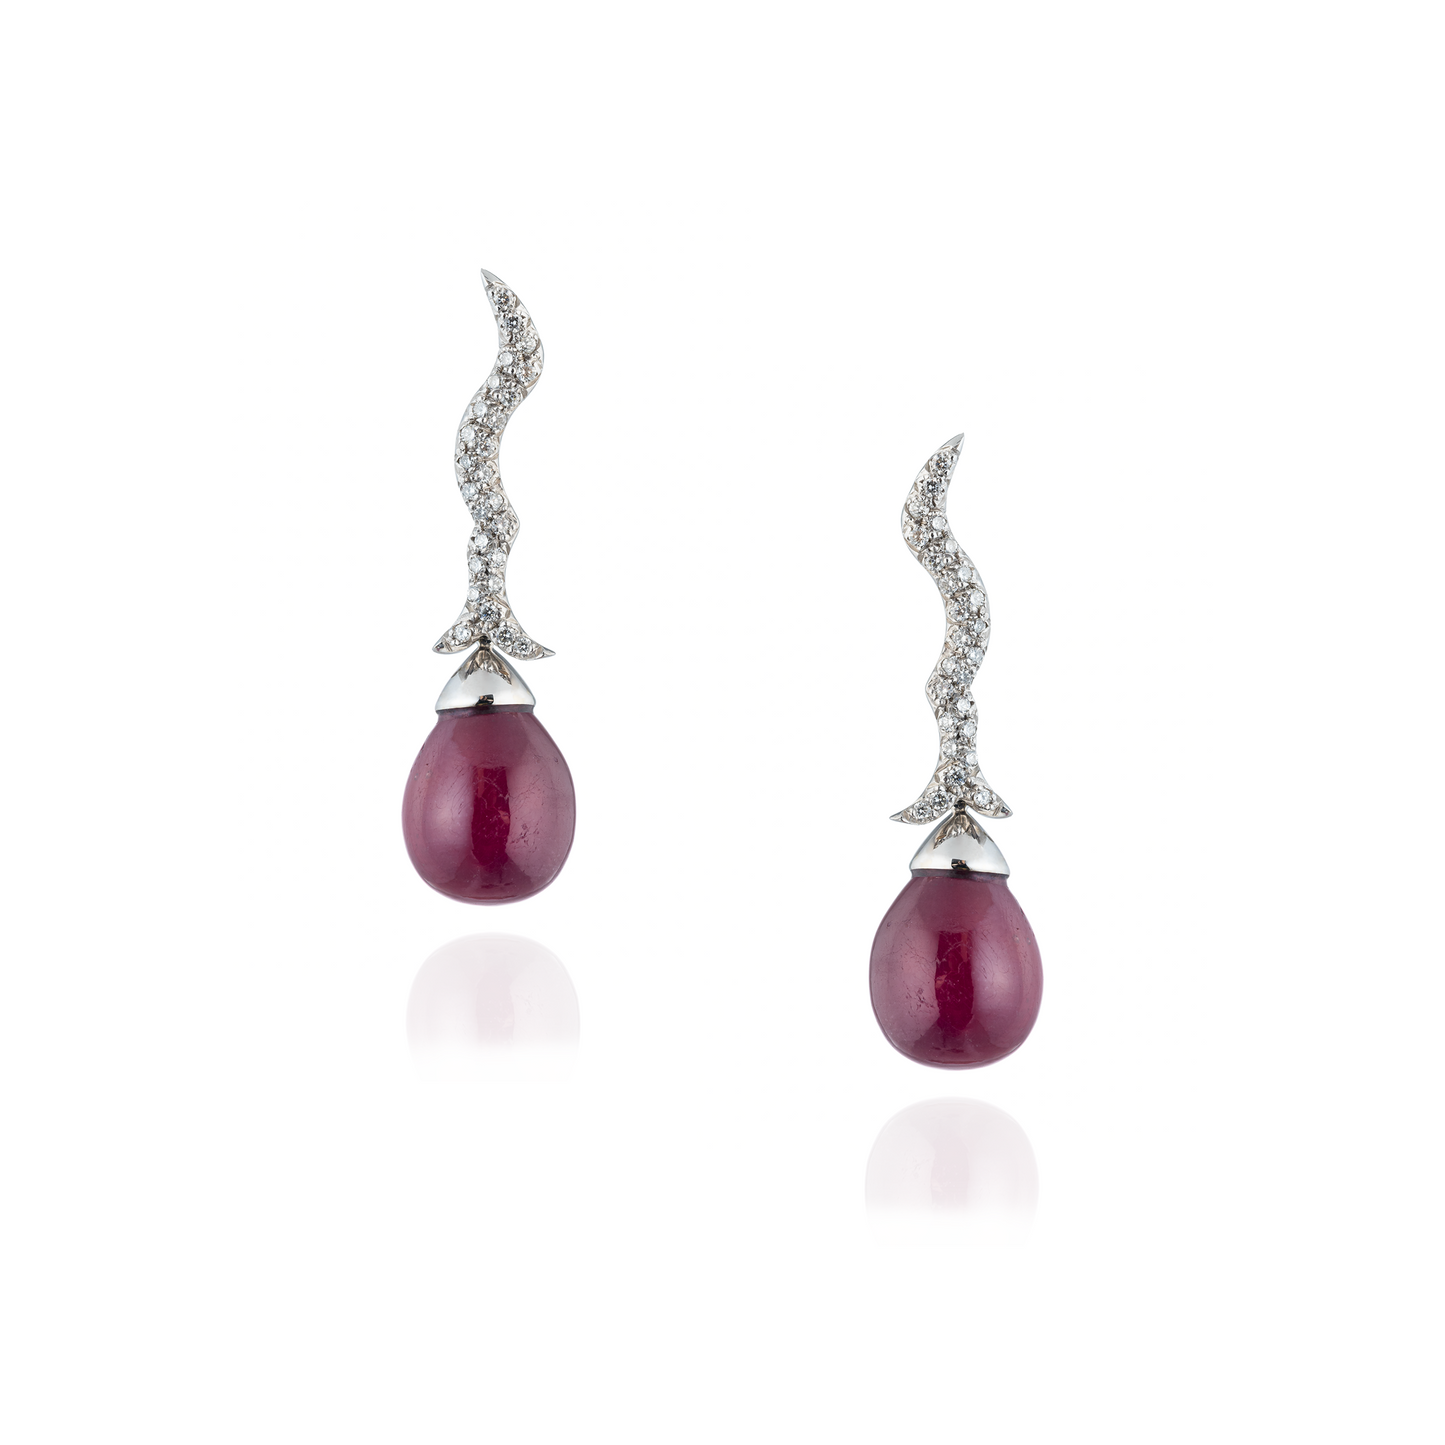 18K White Gold Earrings with Ruby Cabochon Drops